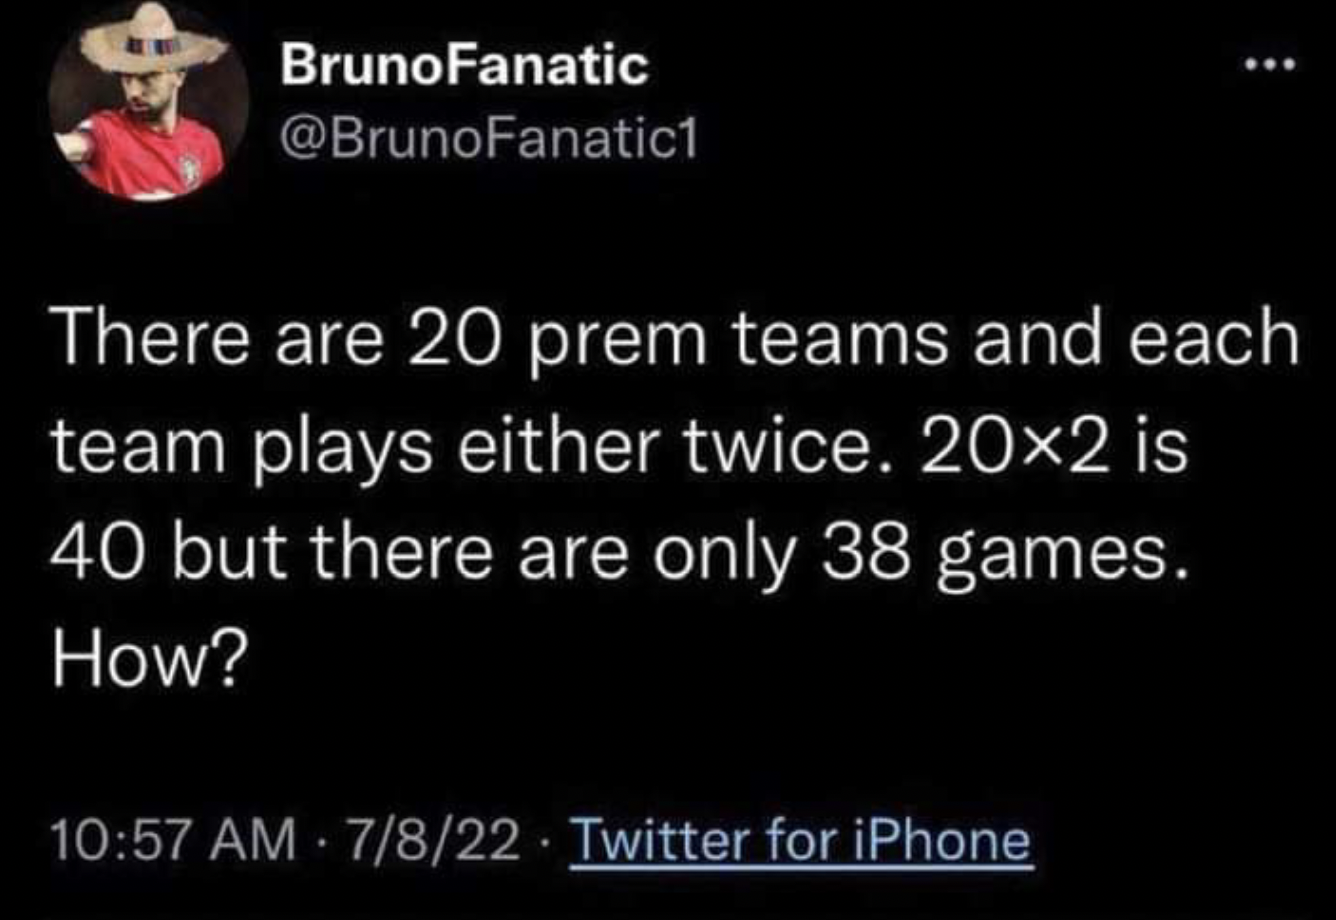 Facepalms - light - BrunoFanatic ... There are 20 prem teams and each team plays either twice. 20x2 is 40 but there are only 38 games. How?